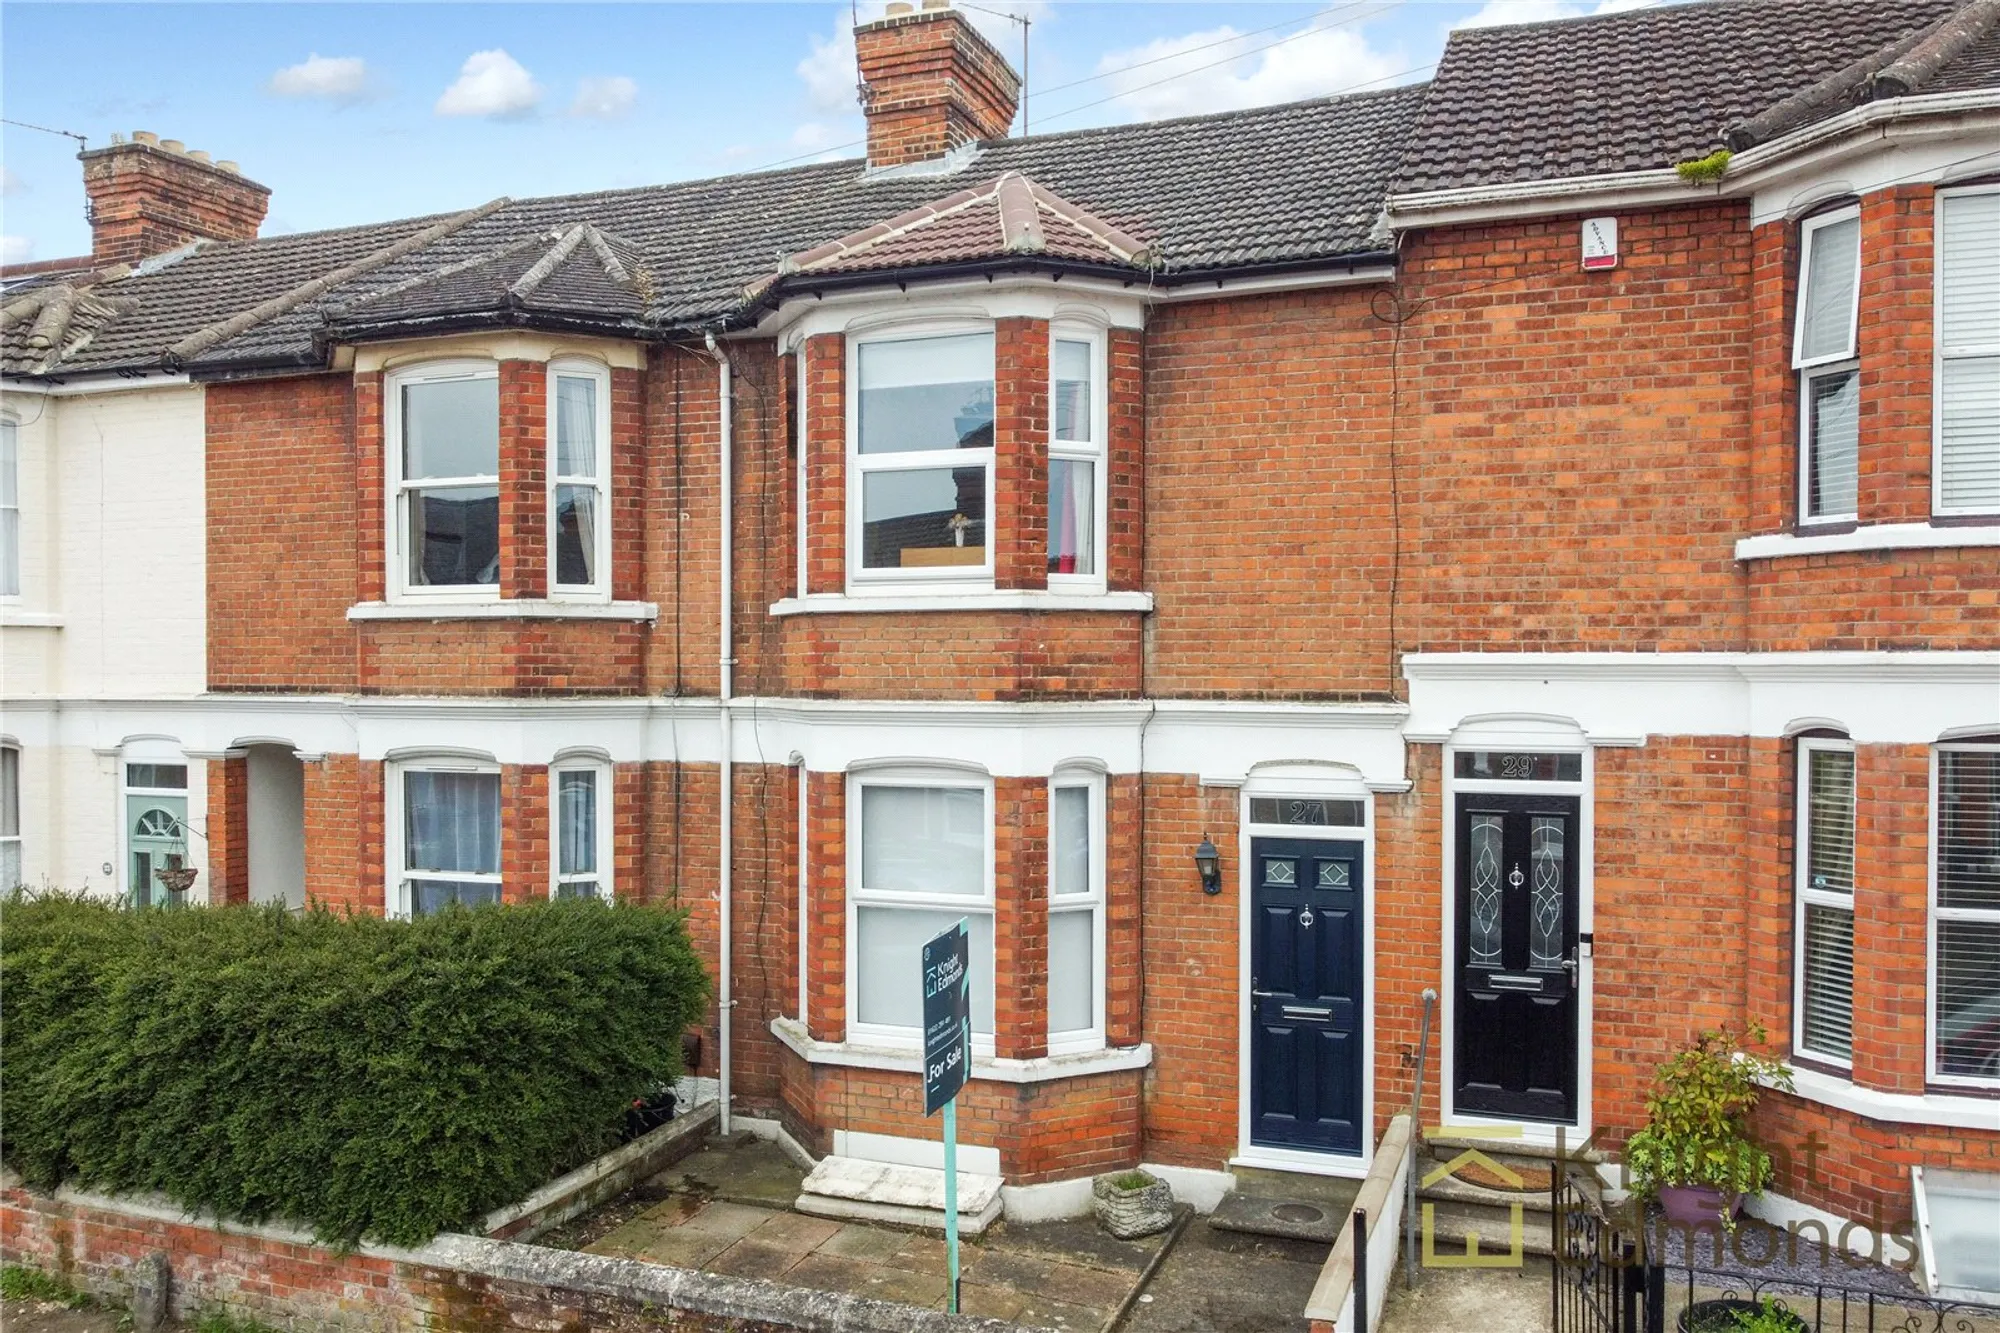 3 bed mid-terraced house for sale in King Edward Road, Maidstone, ME15